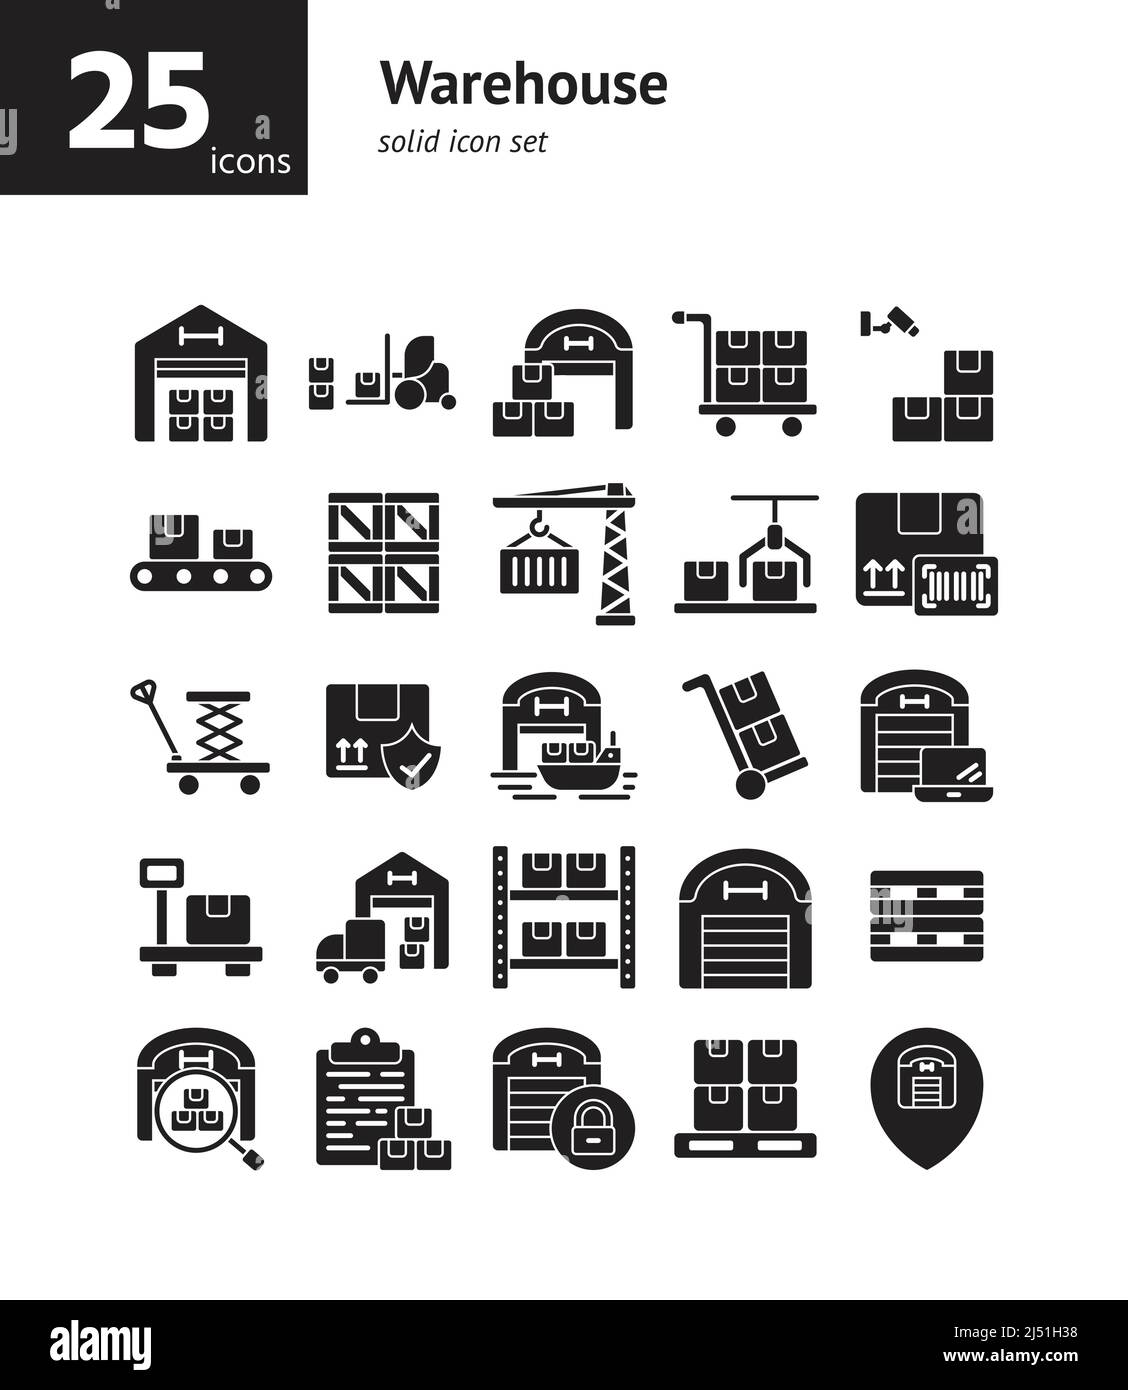 Warehouse solid icon set. Vector and Illustration. Stock Vector